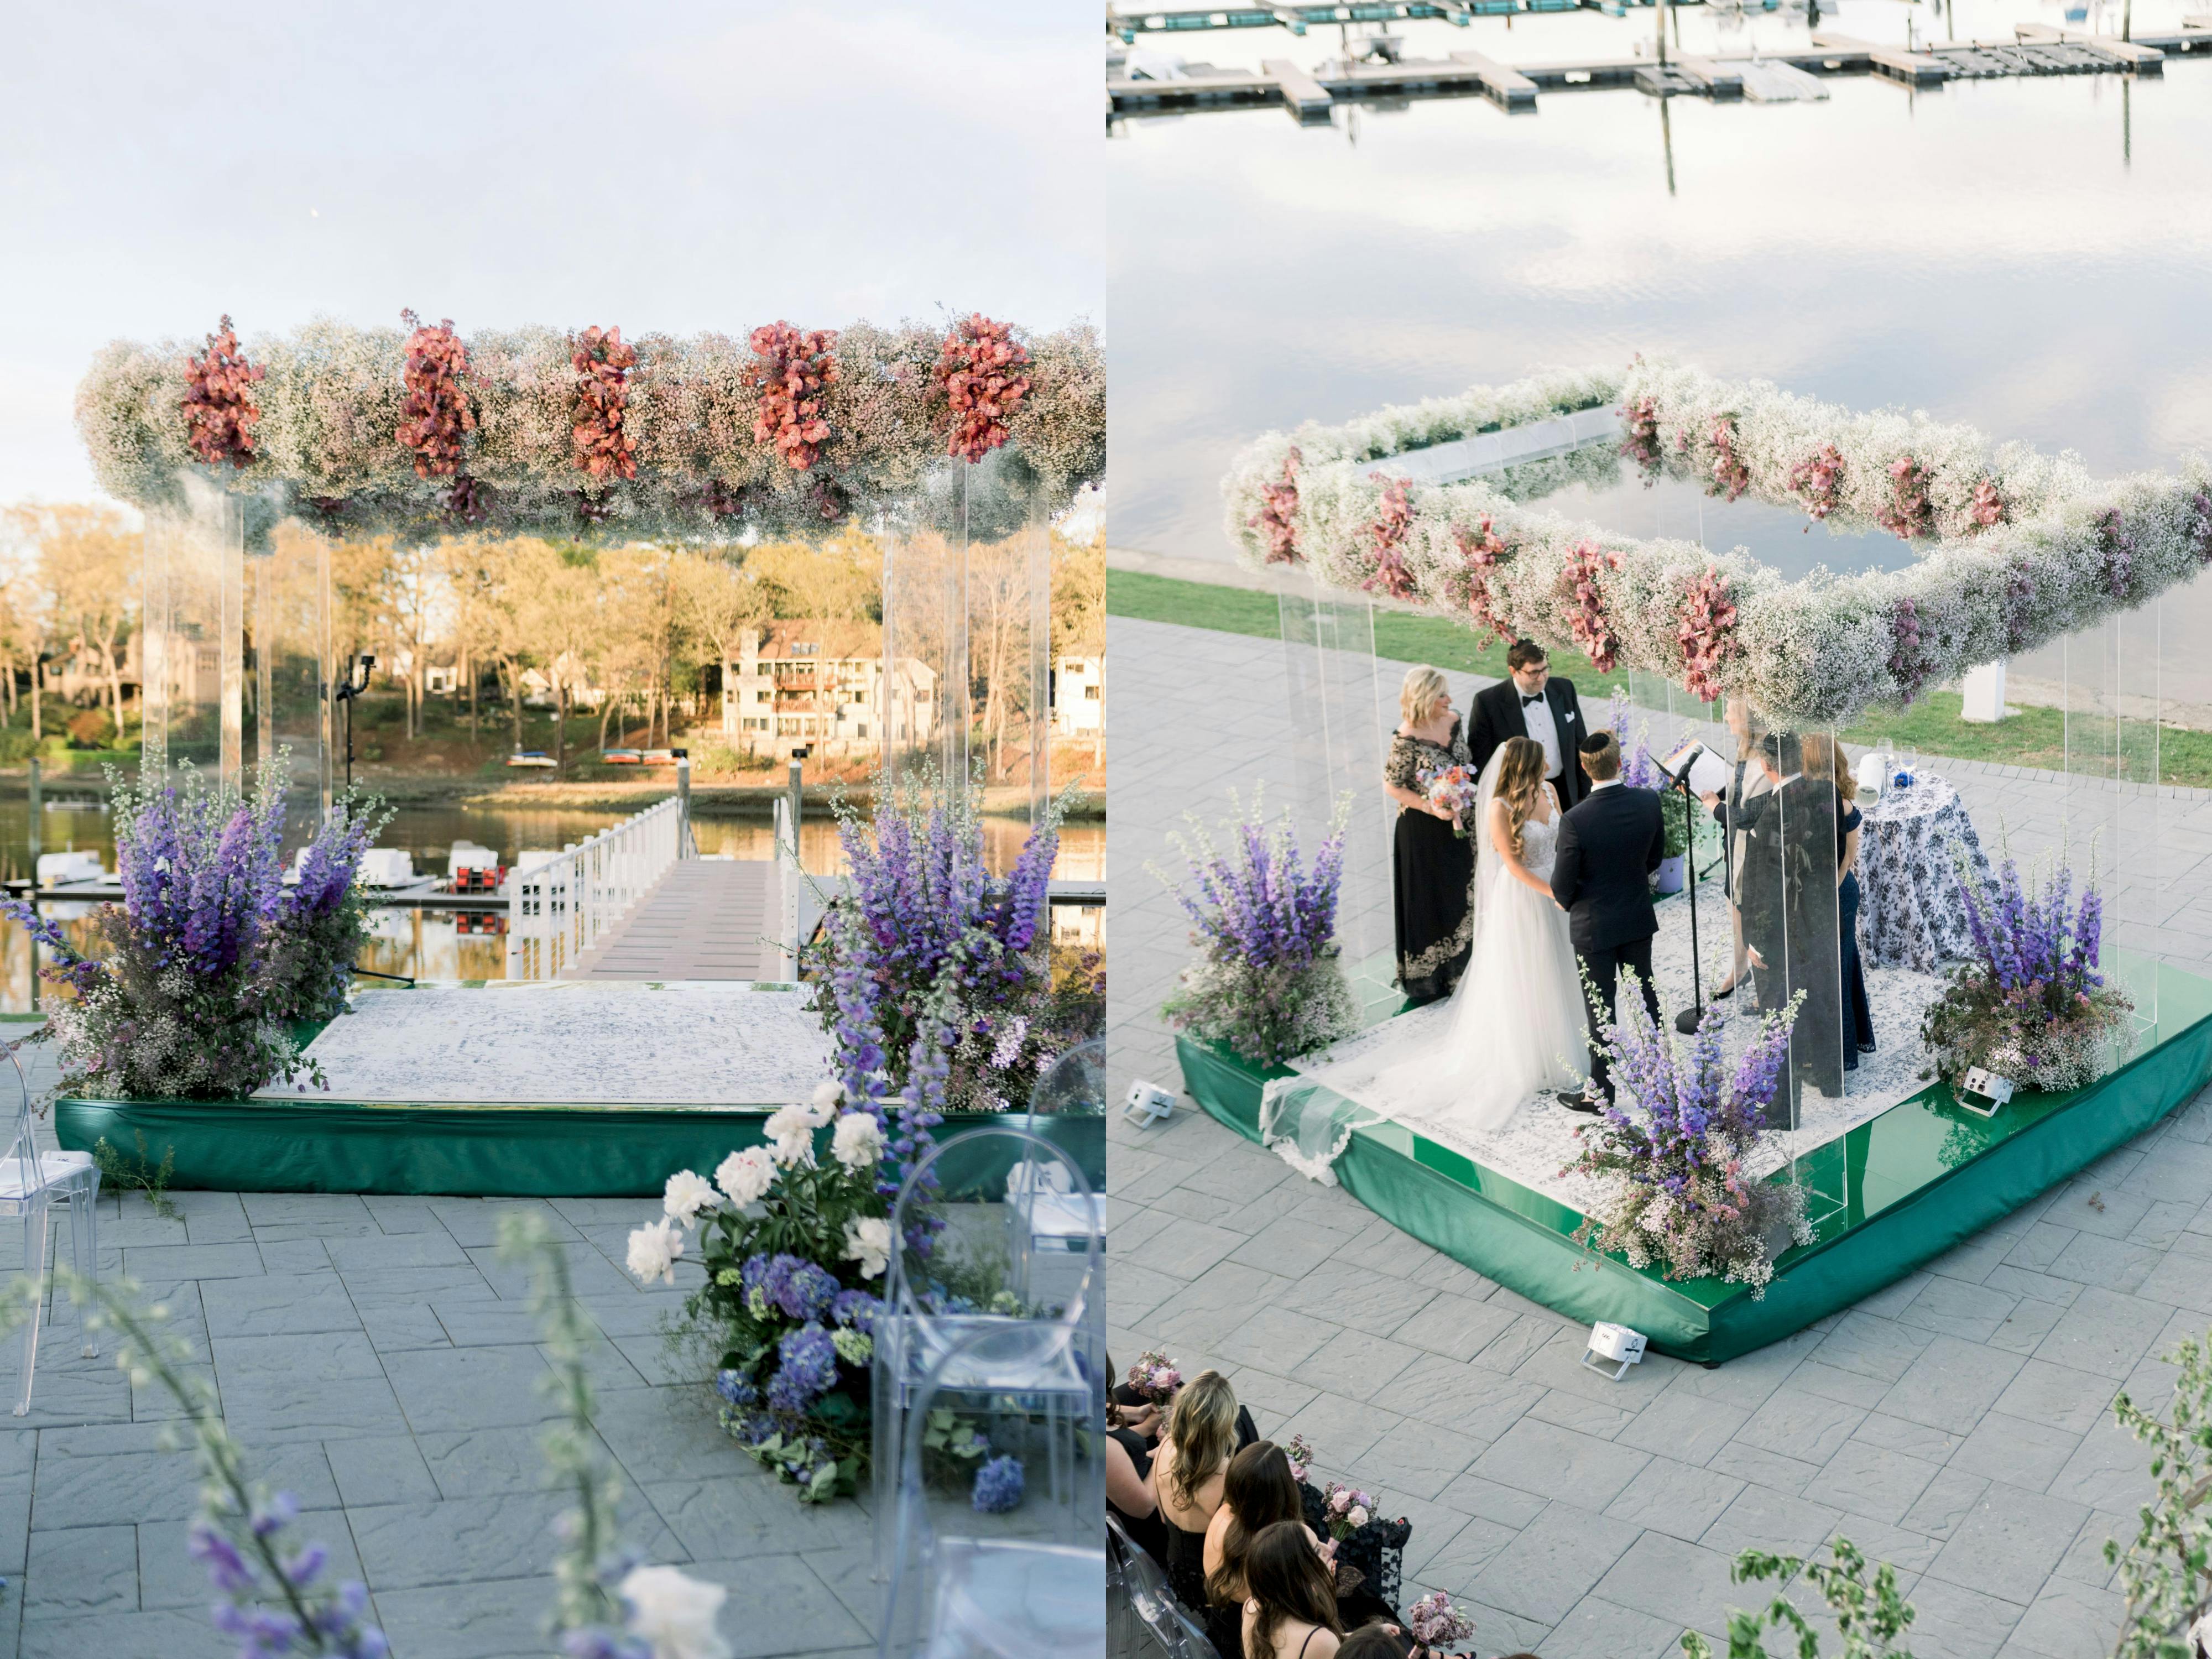 Lucite Wedding Chuppah Crowned With Baby’s Breath and Interspersed Pink Blooms | PartySlate